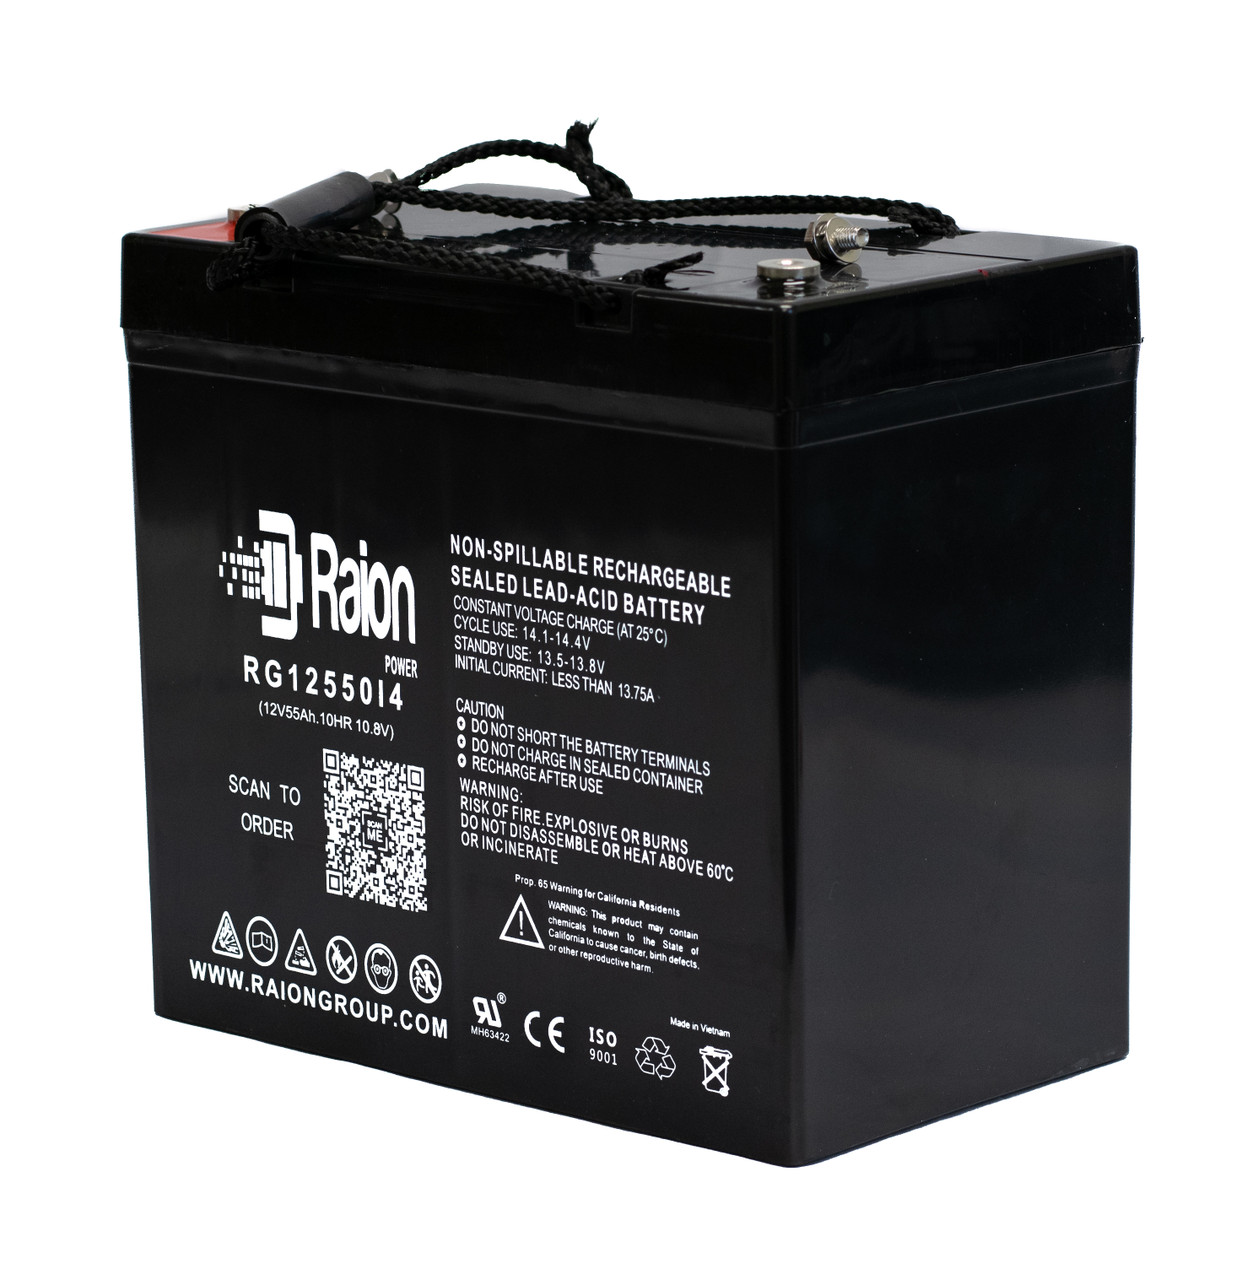 Raion Power 12V 55Ah 22NF Mobility Scooter Battery Replacement for Pride Mobility Jazzy 1121